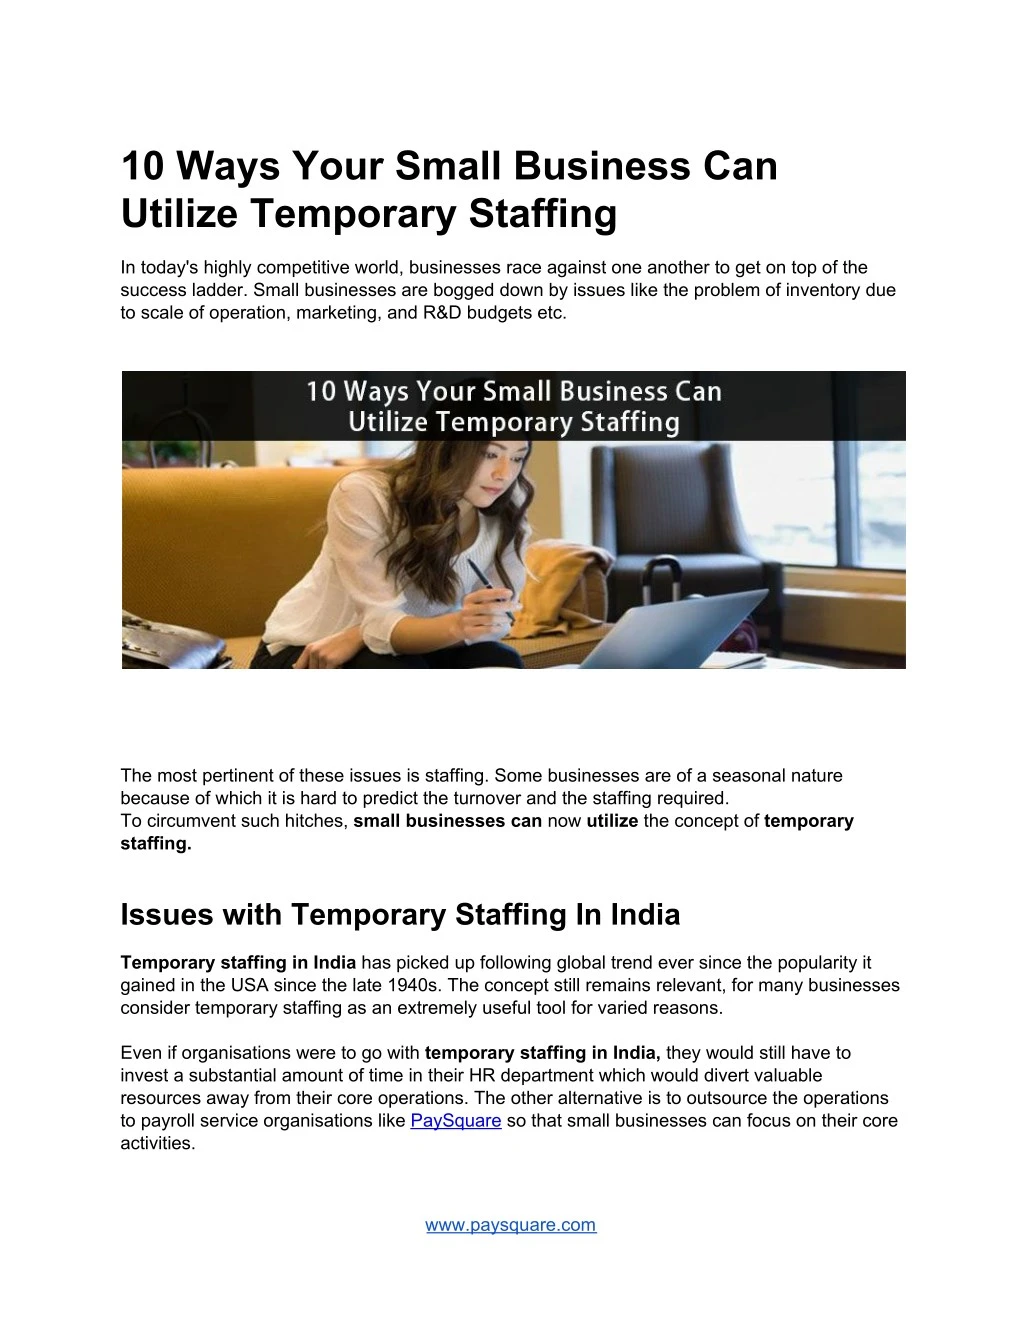 10 ways your small business can utilize temporary